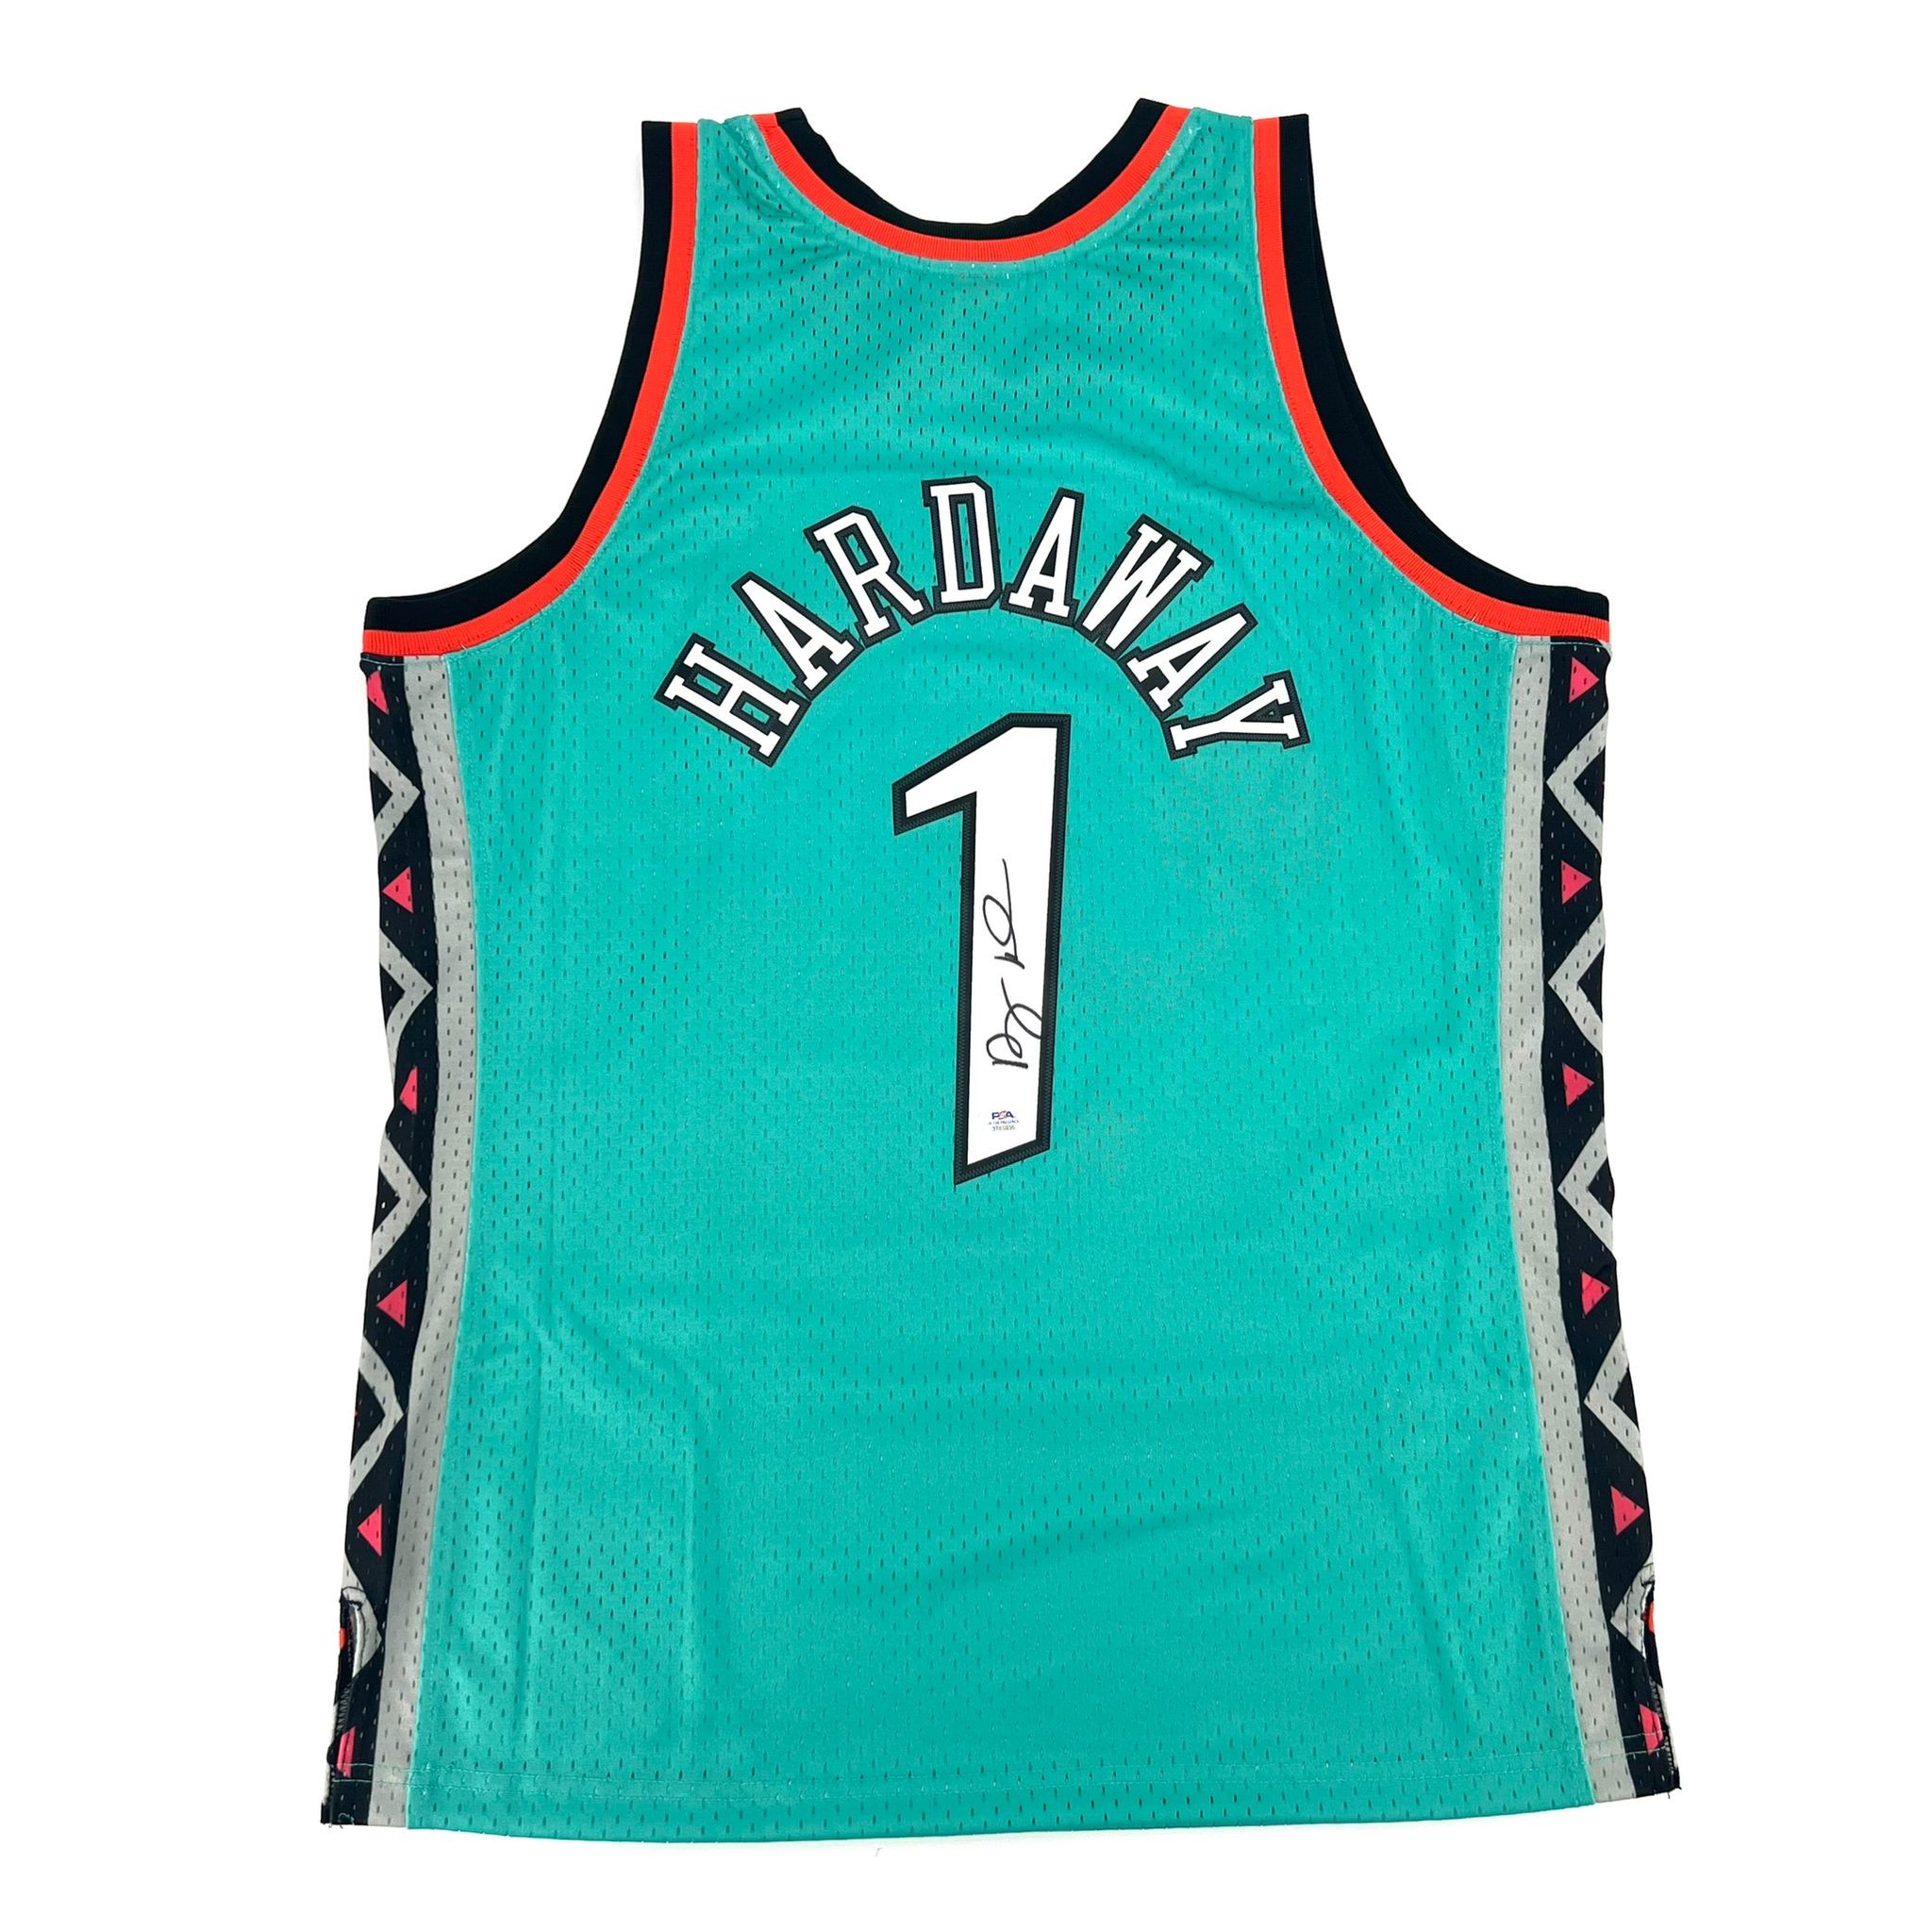 Orlando Magic Anfernee Penny Hardaway Autographed Teal Authentic Mitchell &  Ness All Star Game Feb 11,1996 Hardwood Classic Swingman Jersey Size XL